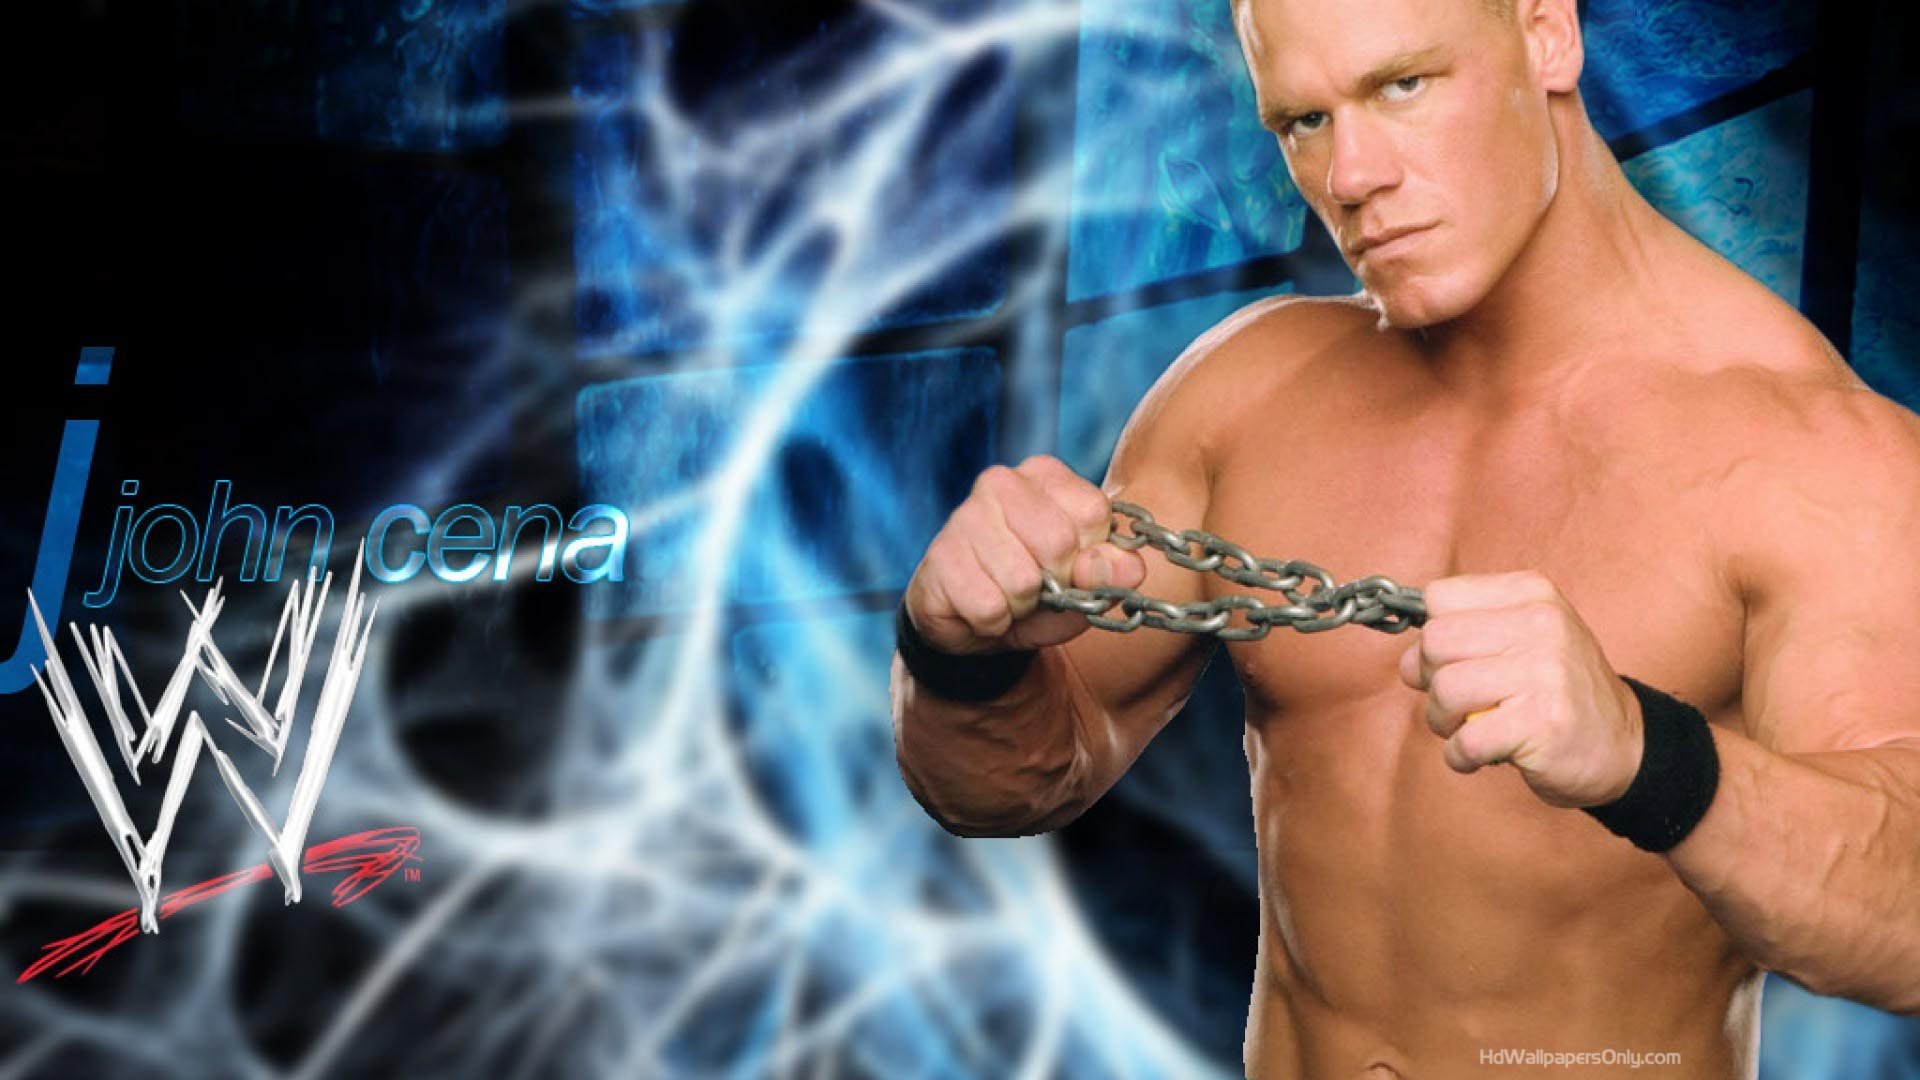 HD WWE wallpaper featuring John Cena with a chain on a blue electrified background.